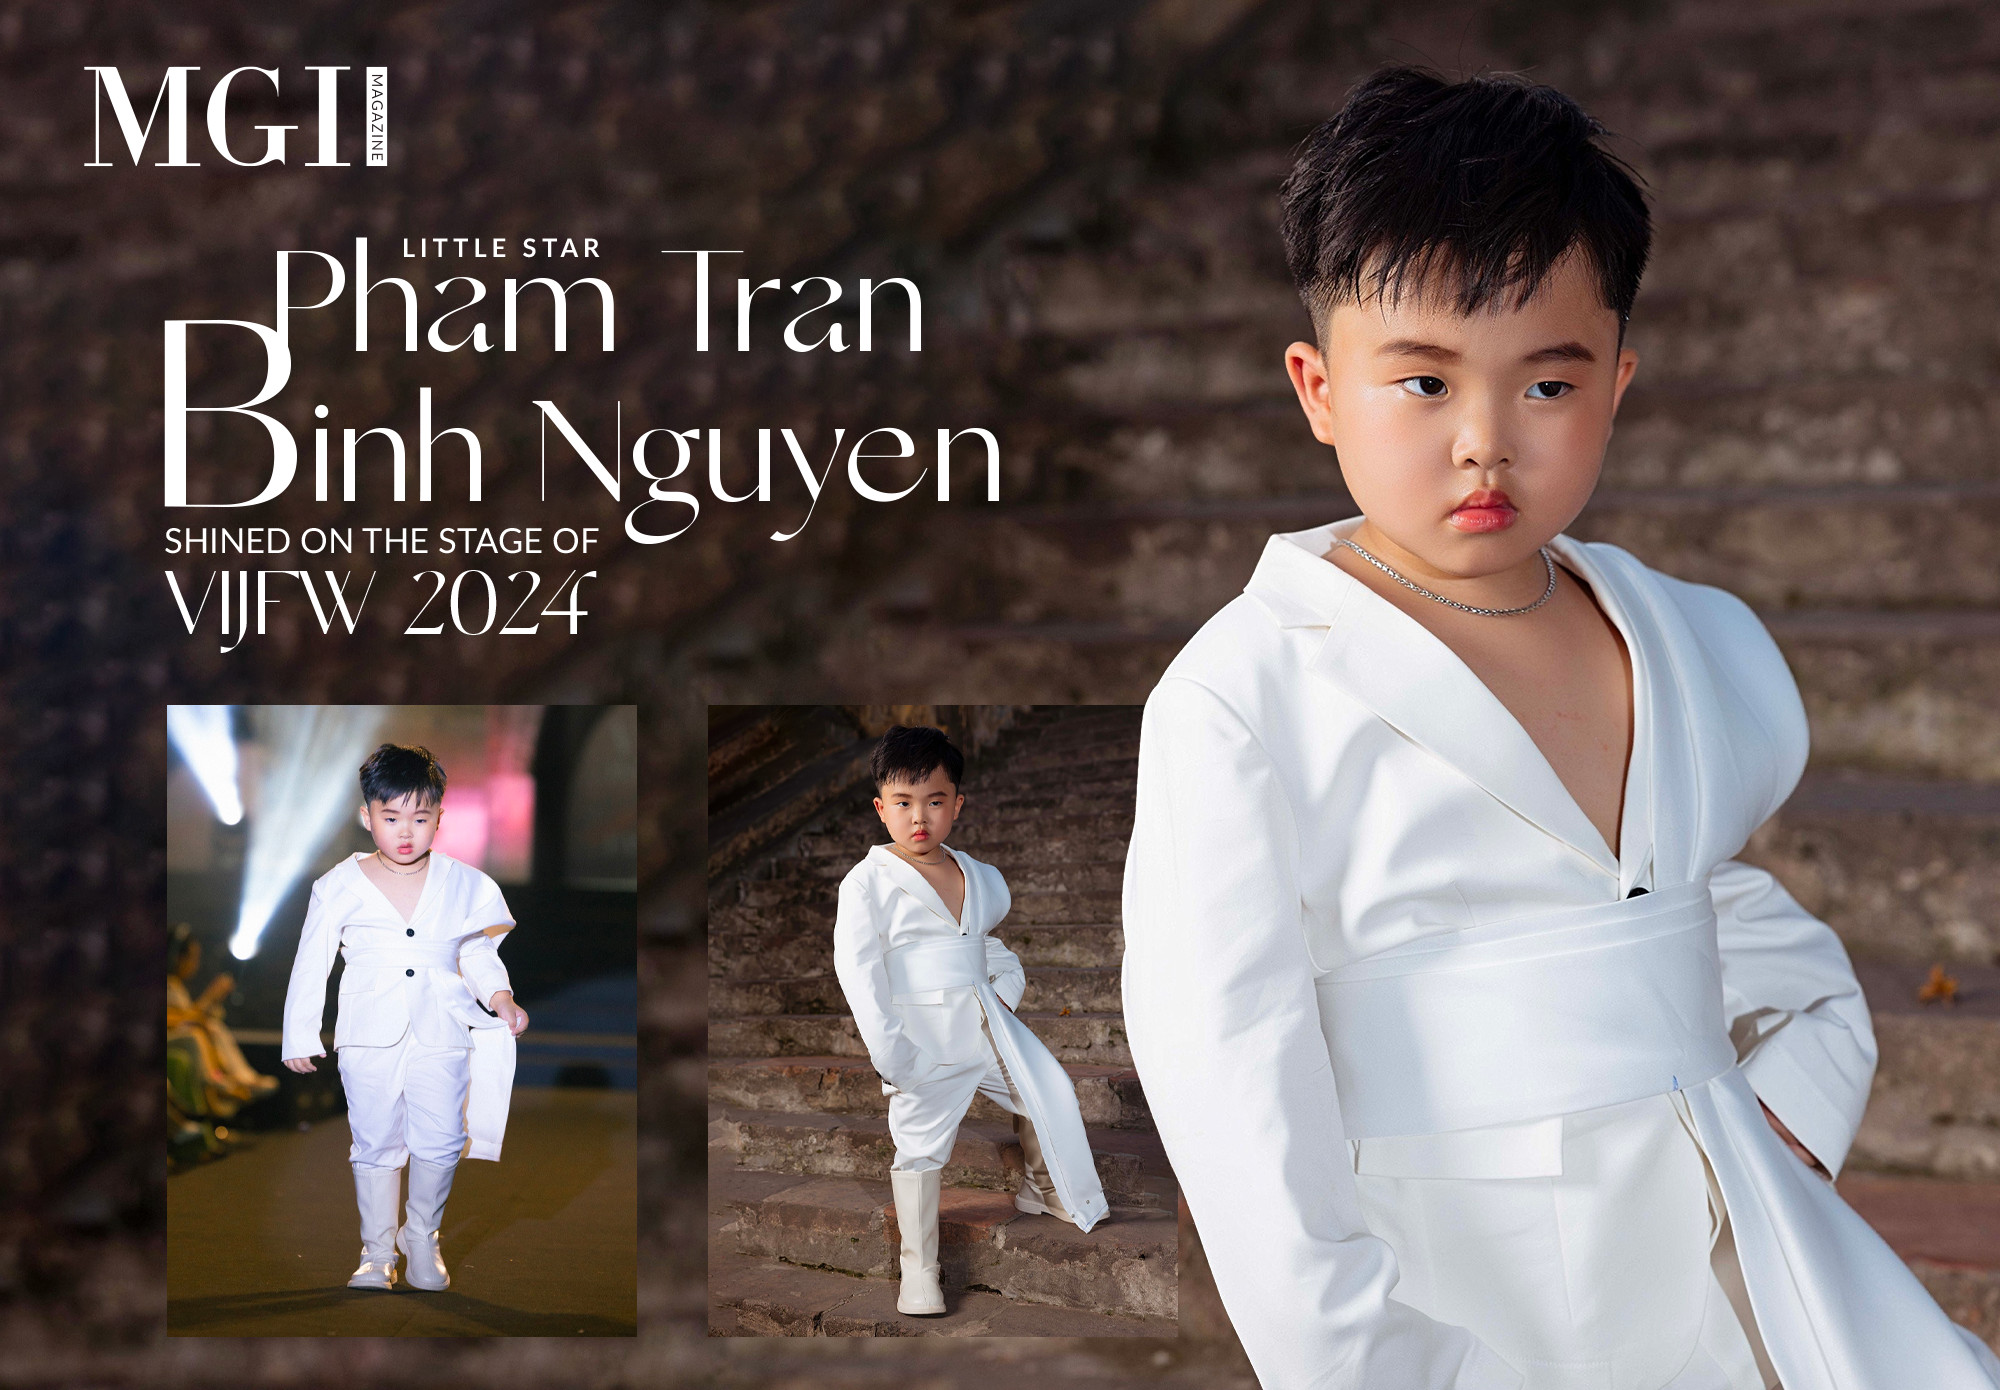 Little star Pham Tran Binh Nguyen shined on the stage of VIJFW 2024